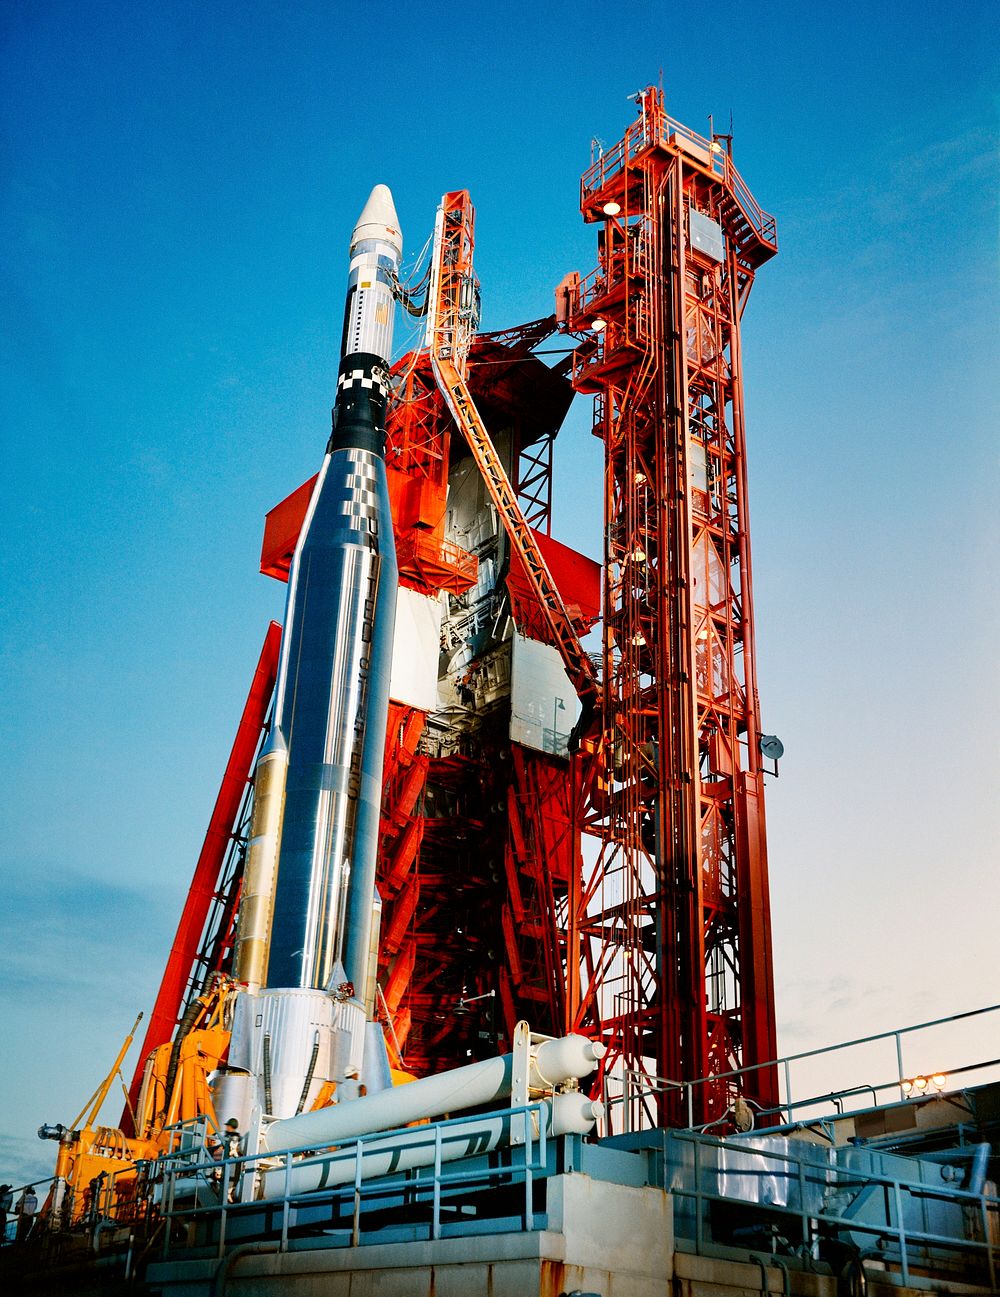 An Agena Target Docking Vehicle atop its Atlas launch vehicle is ready for launch at Launch Complex 14 at Cape Kennedy…